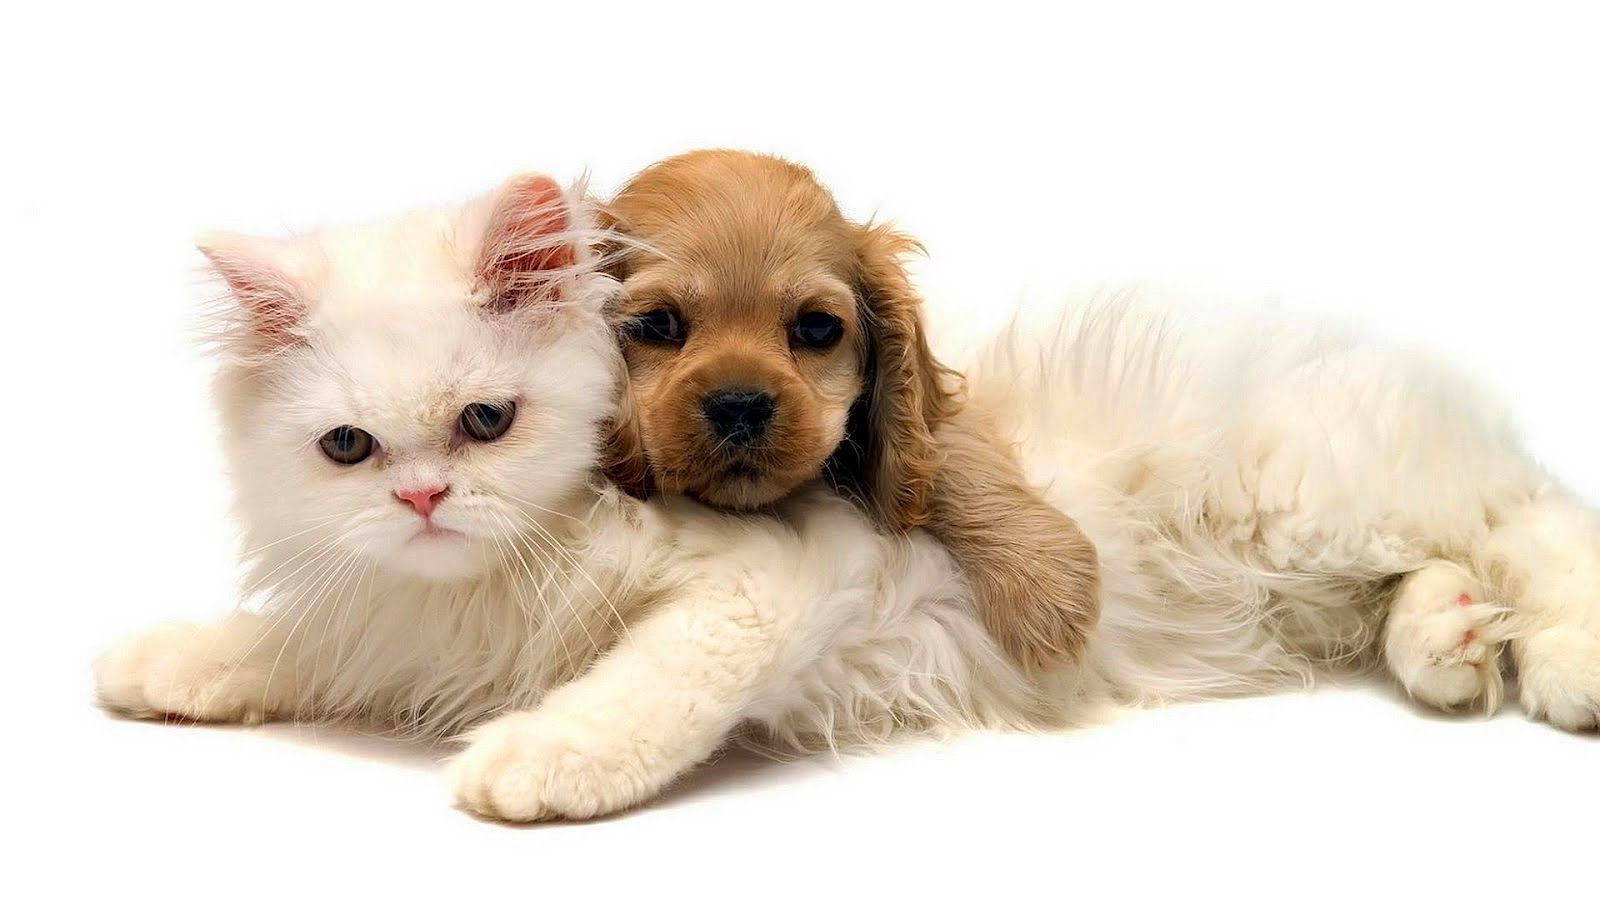 Cats and Dogs Wallpaper Free Cats and Dogs Background